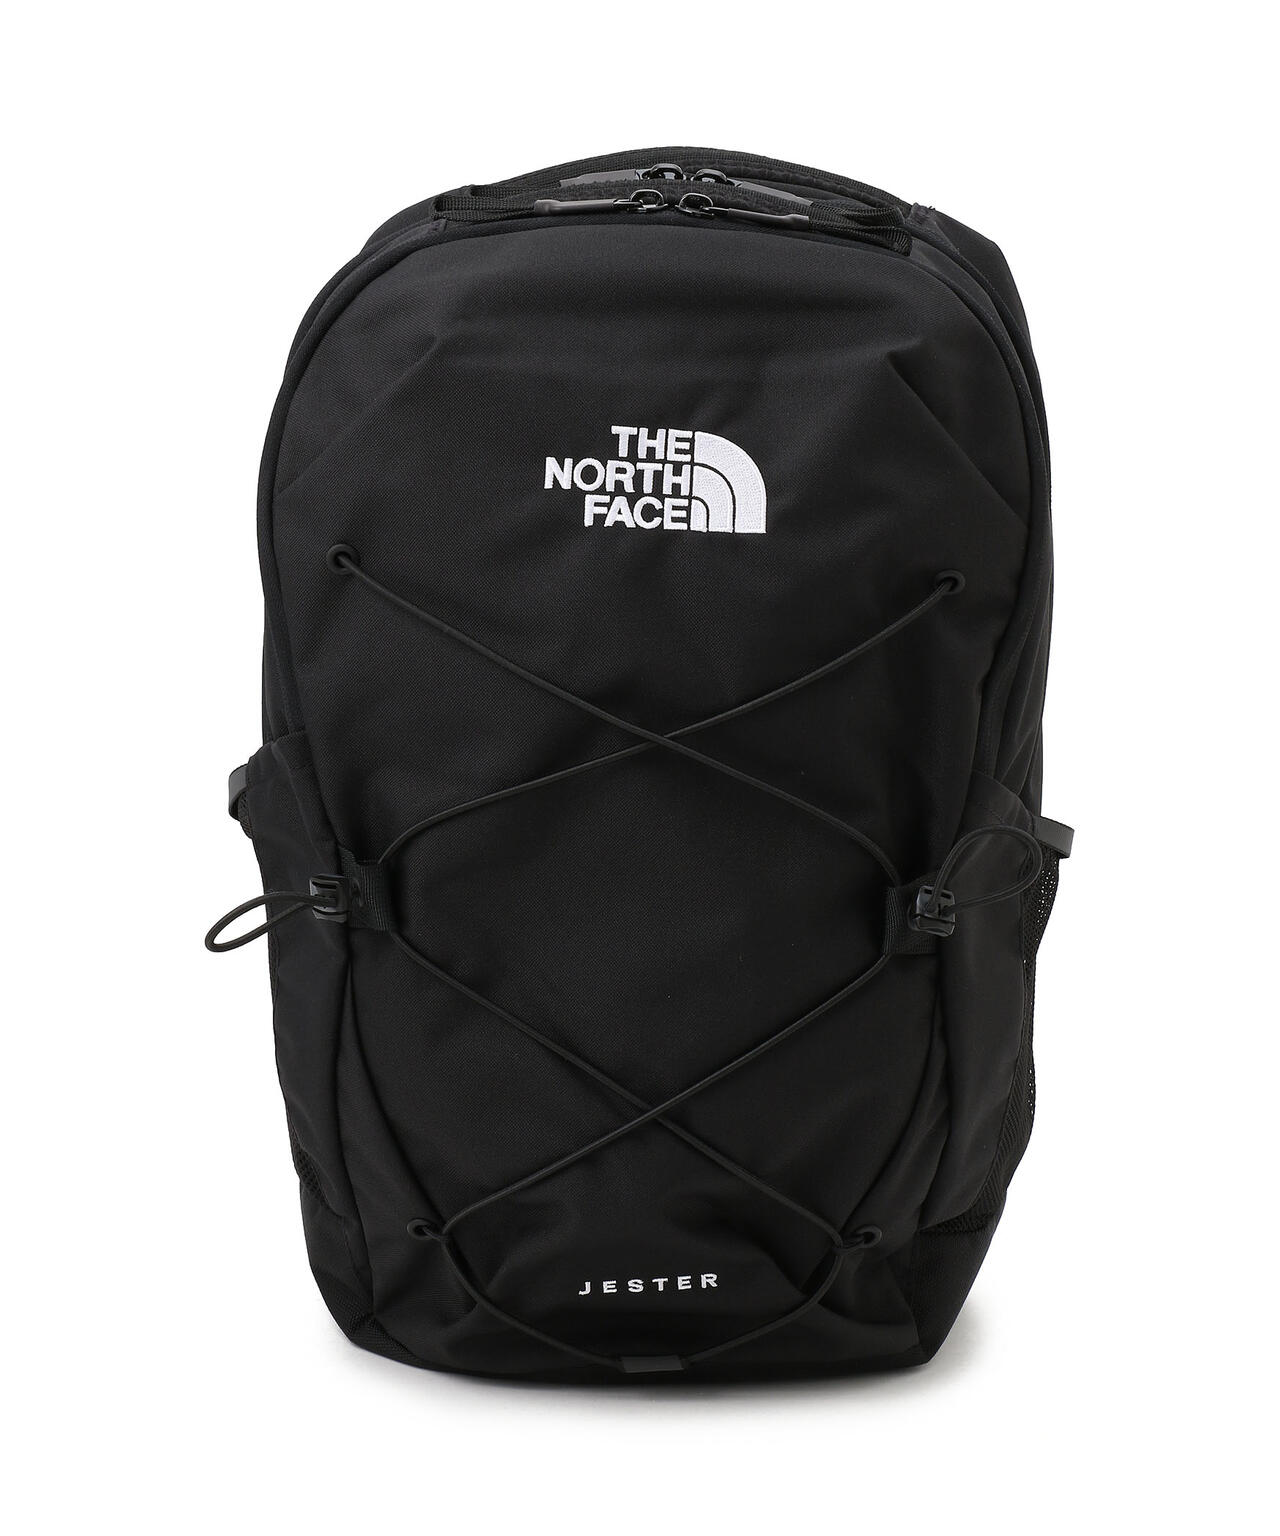 THE NORTH FACE リュック　JESTER